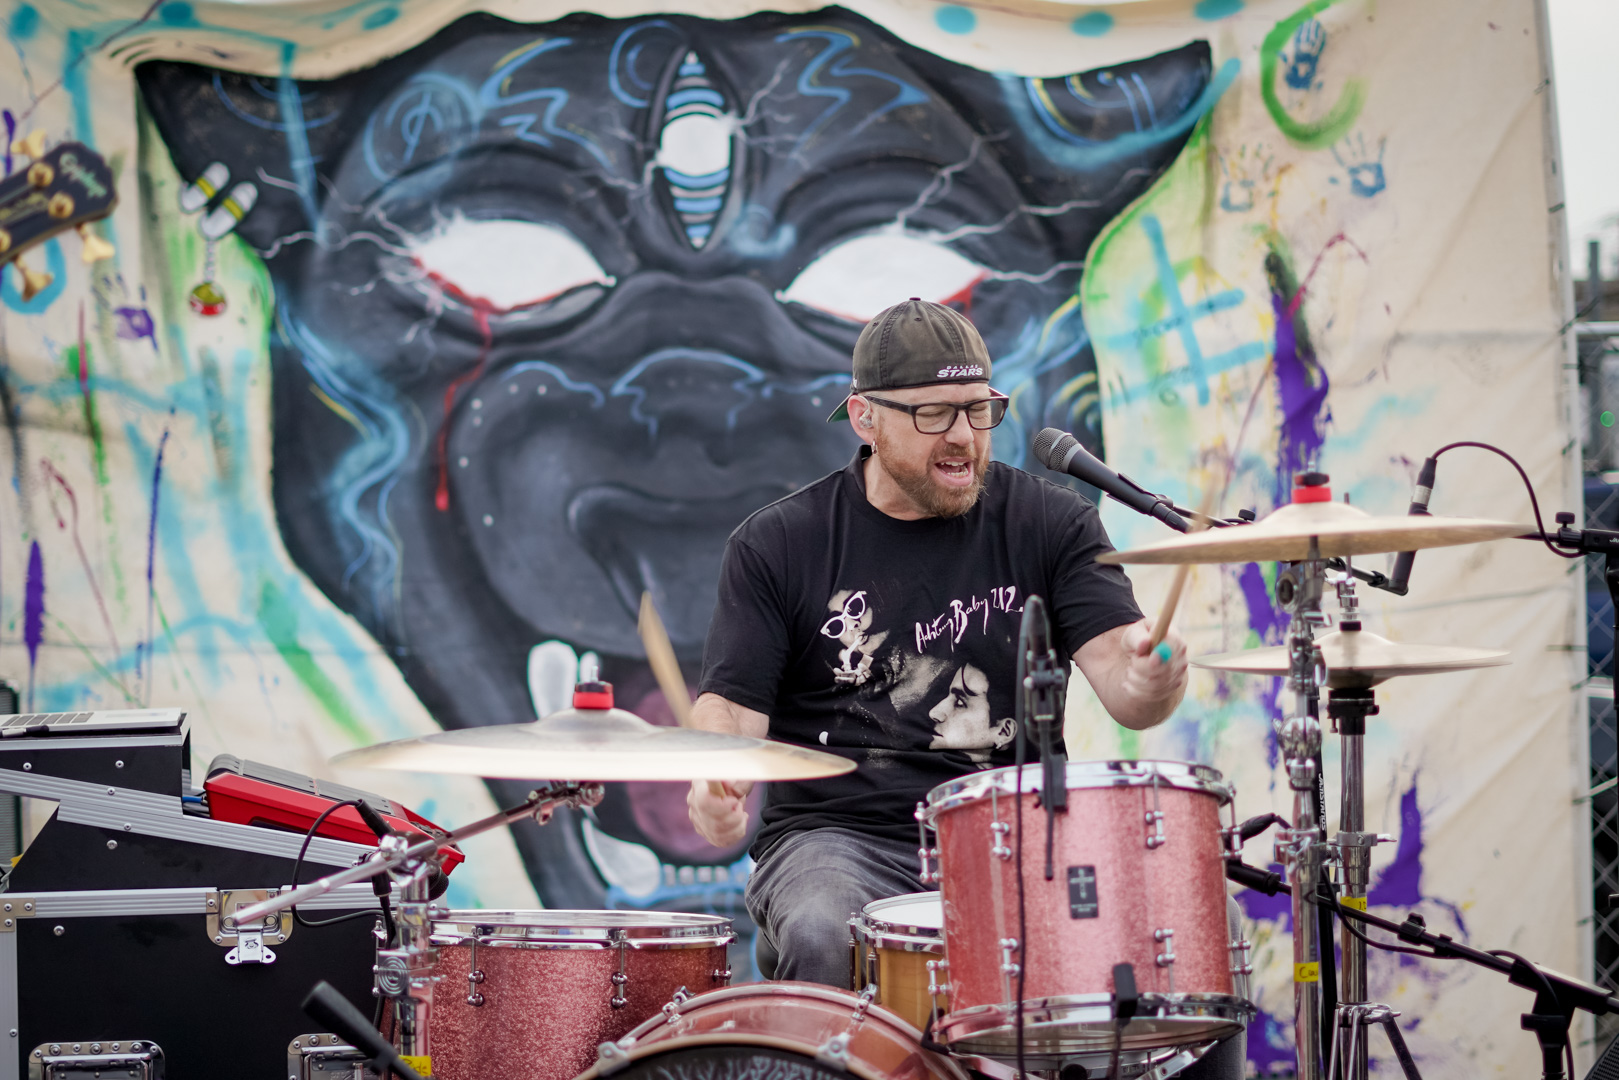 Drummer in front of panther mural